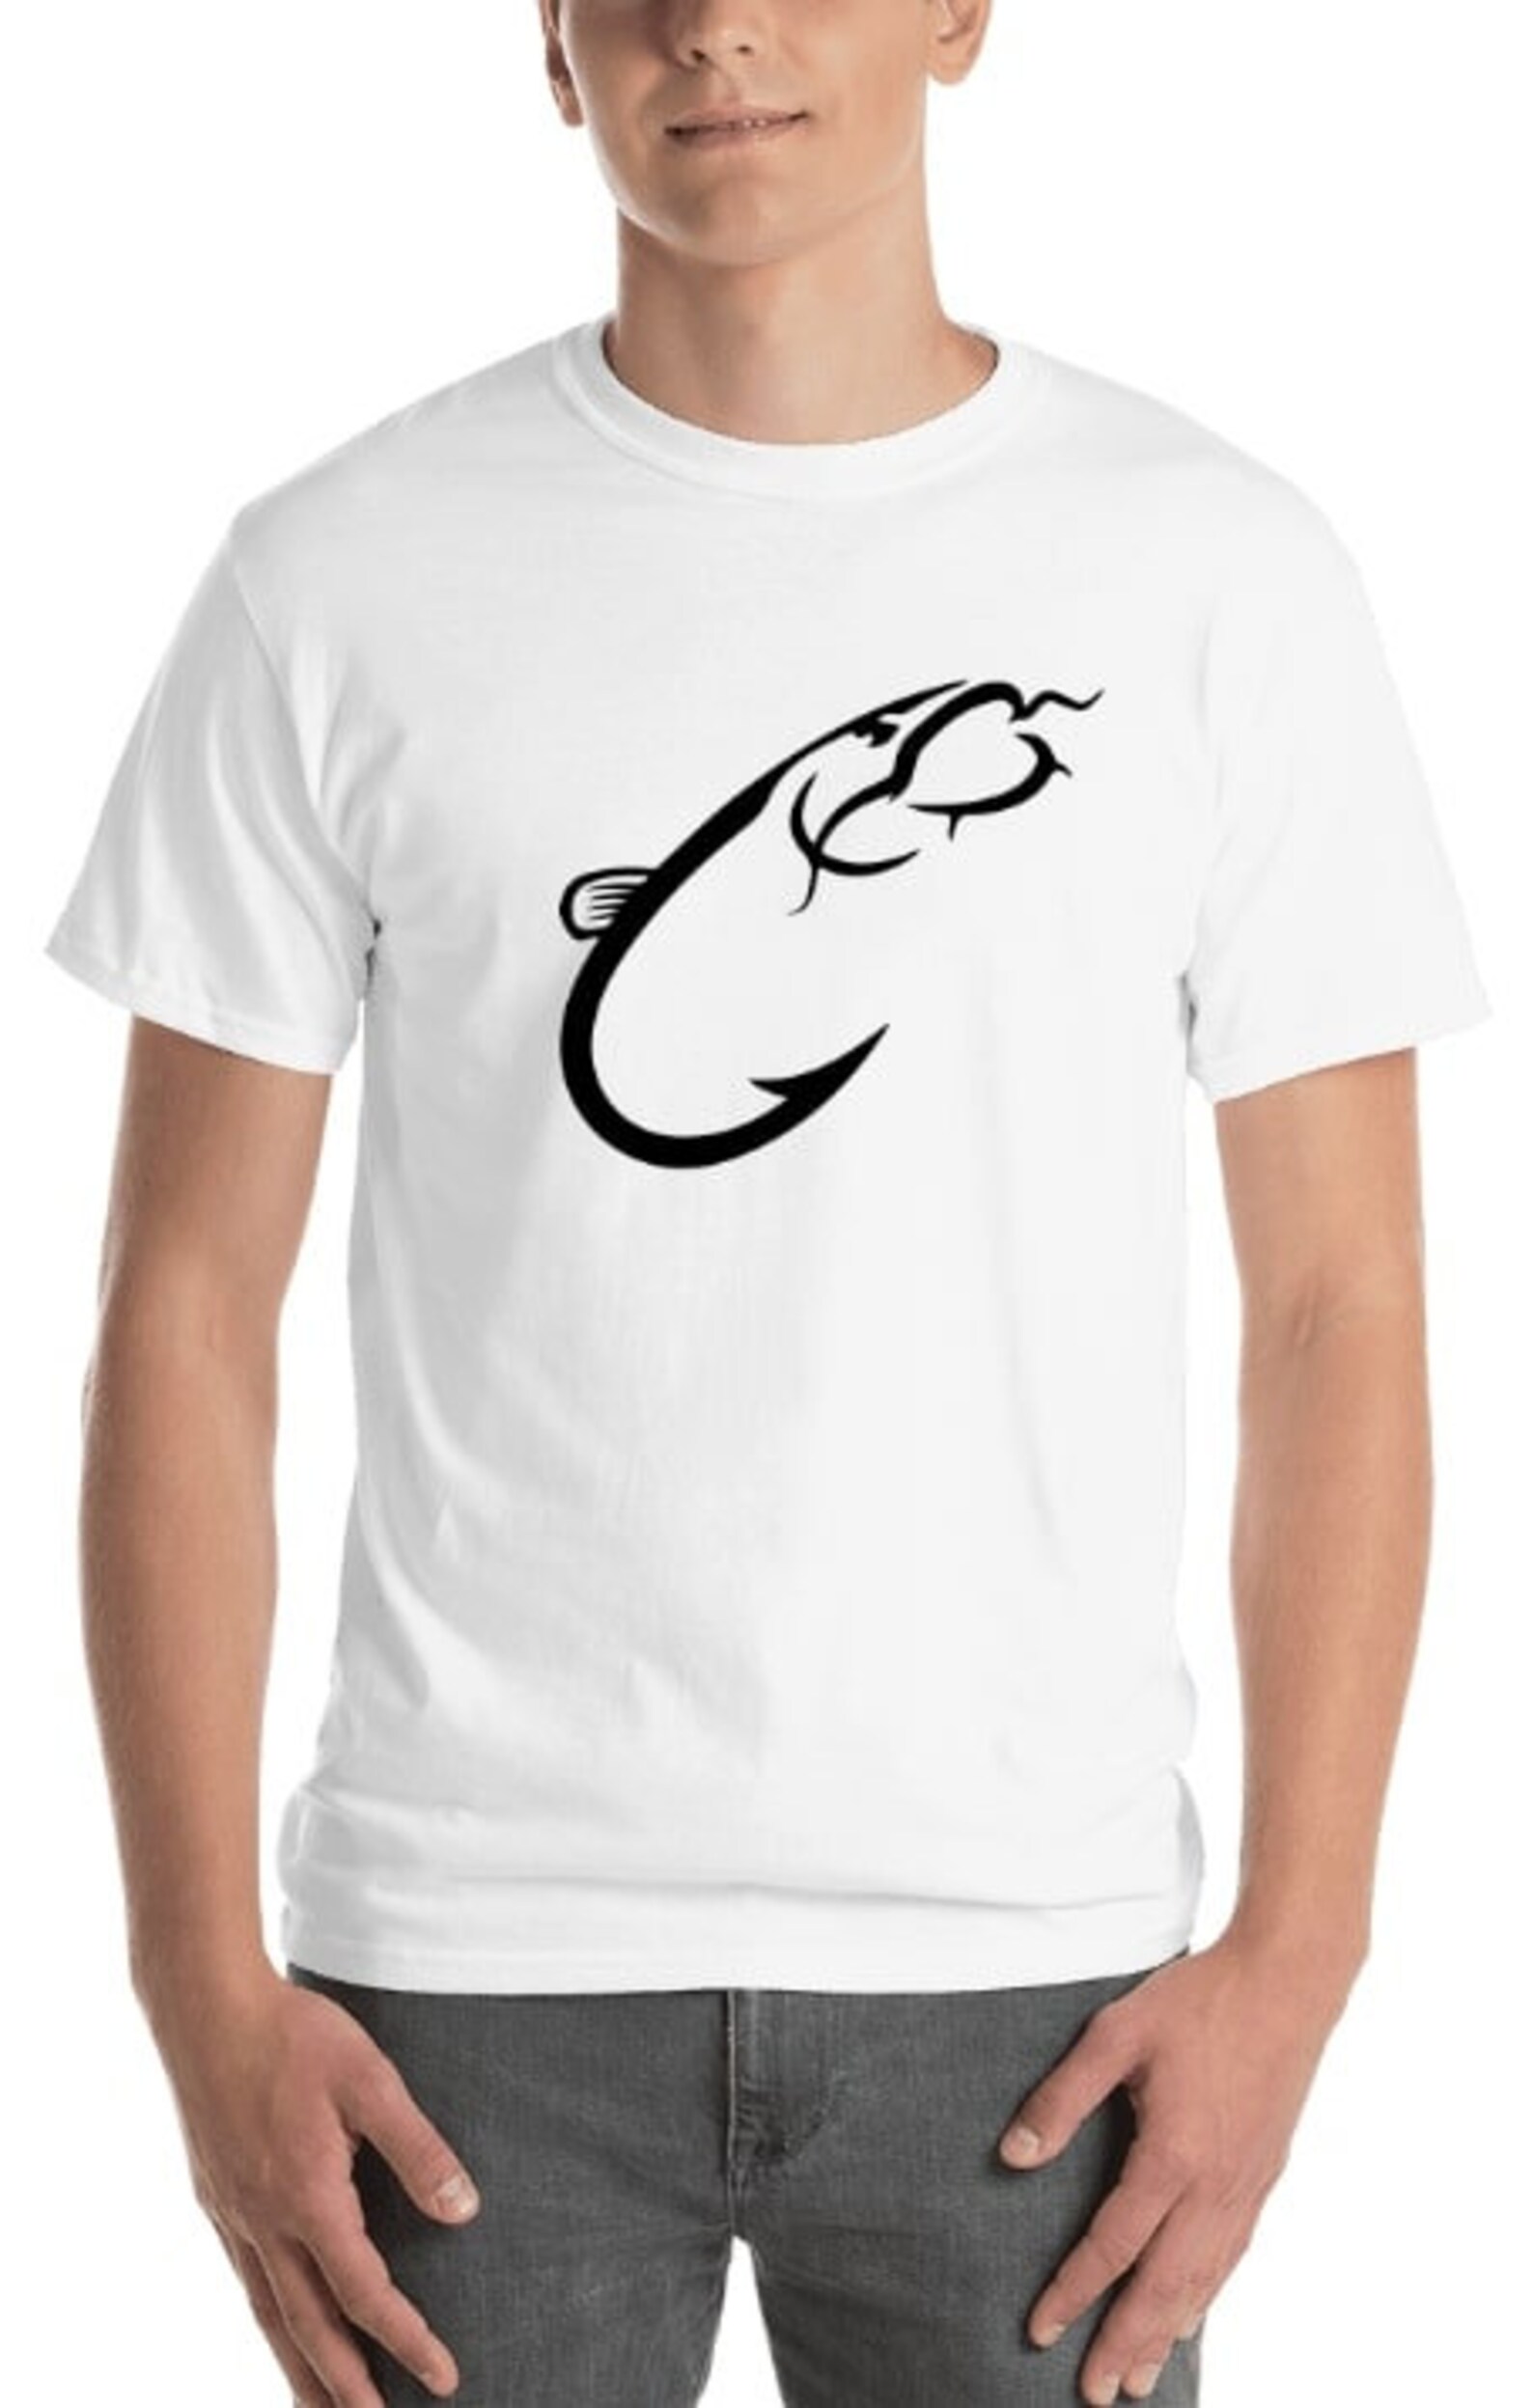 Classic white t-shirt with delicate fish hook.